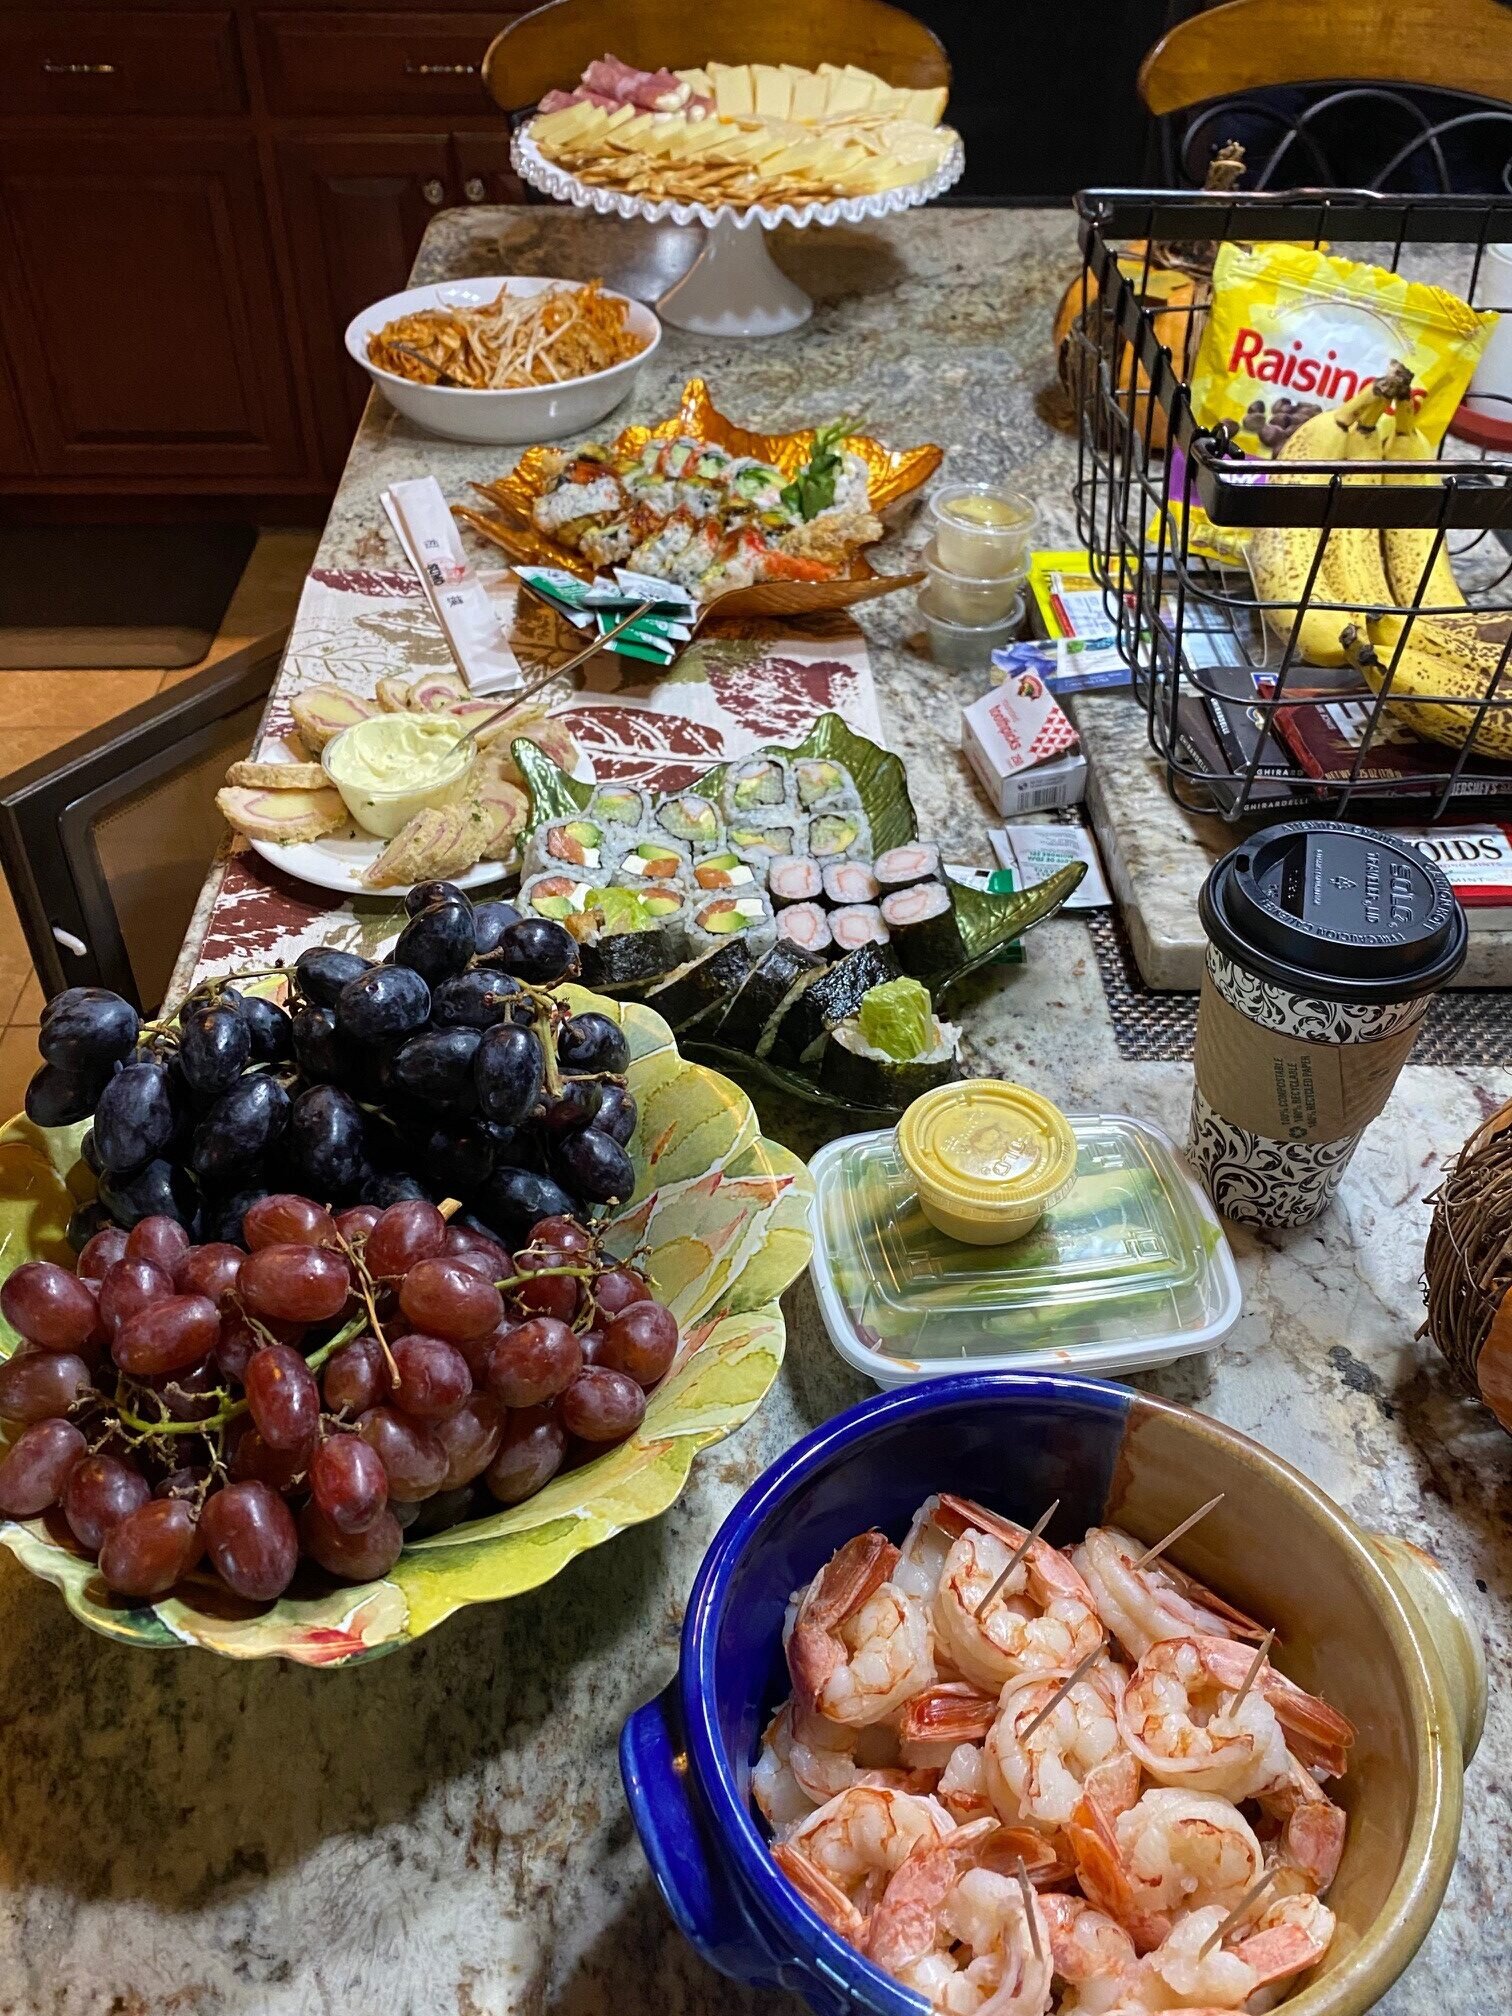 What a spread!